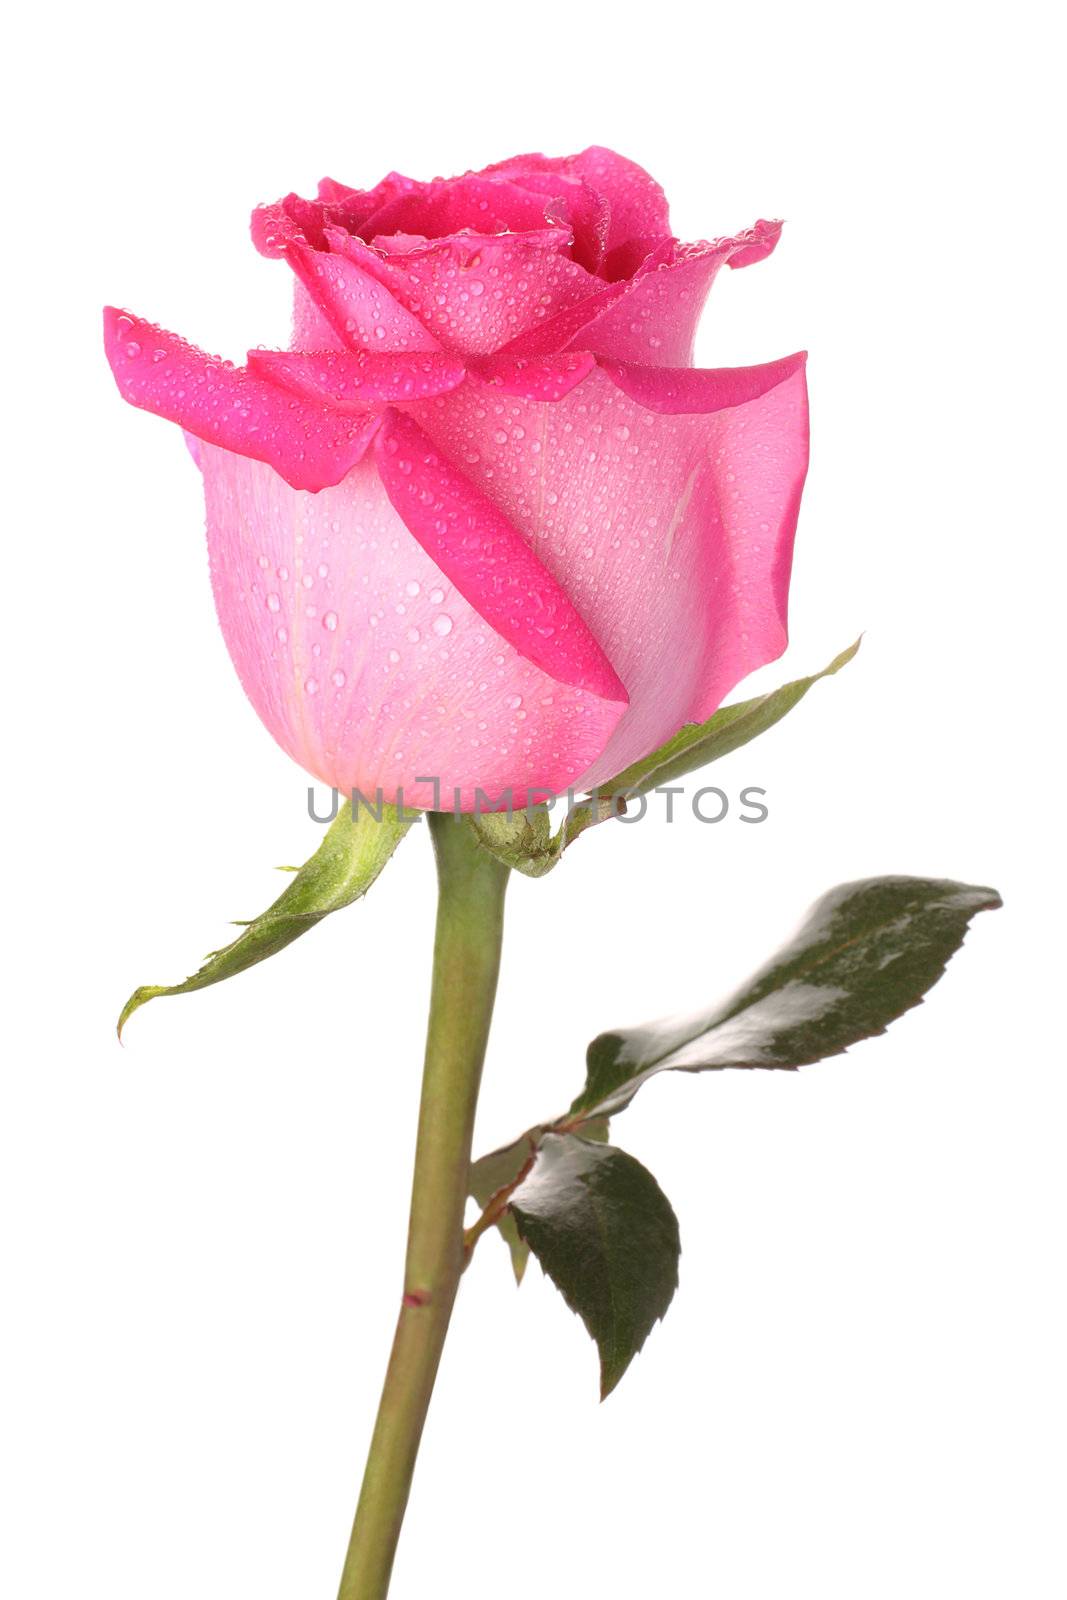 Pink rose with drops of water by ksenish